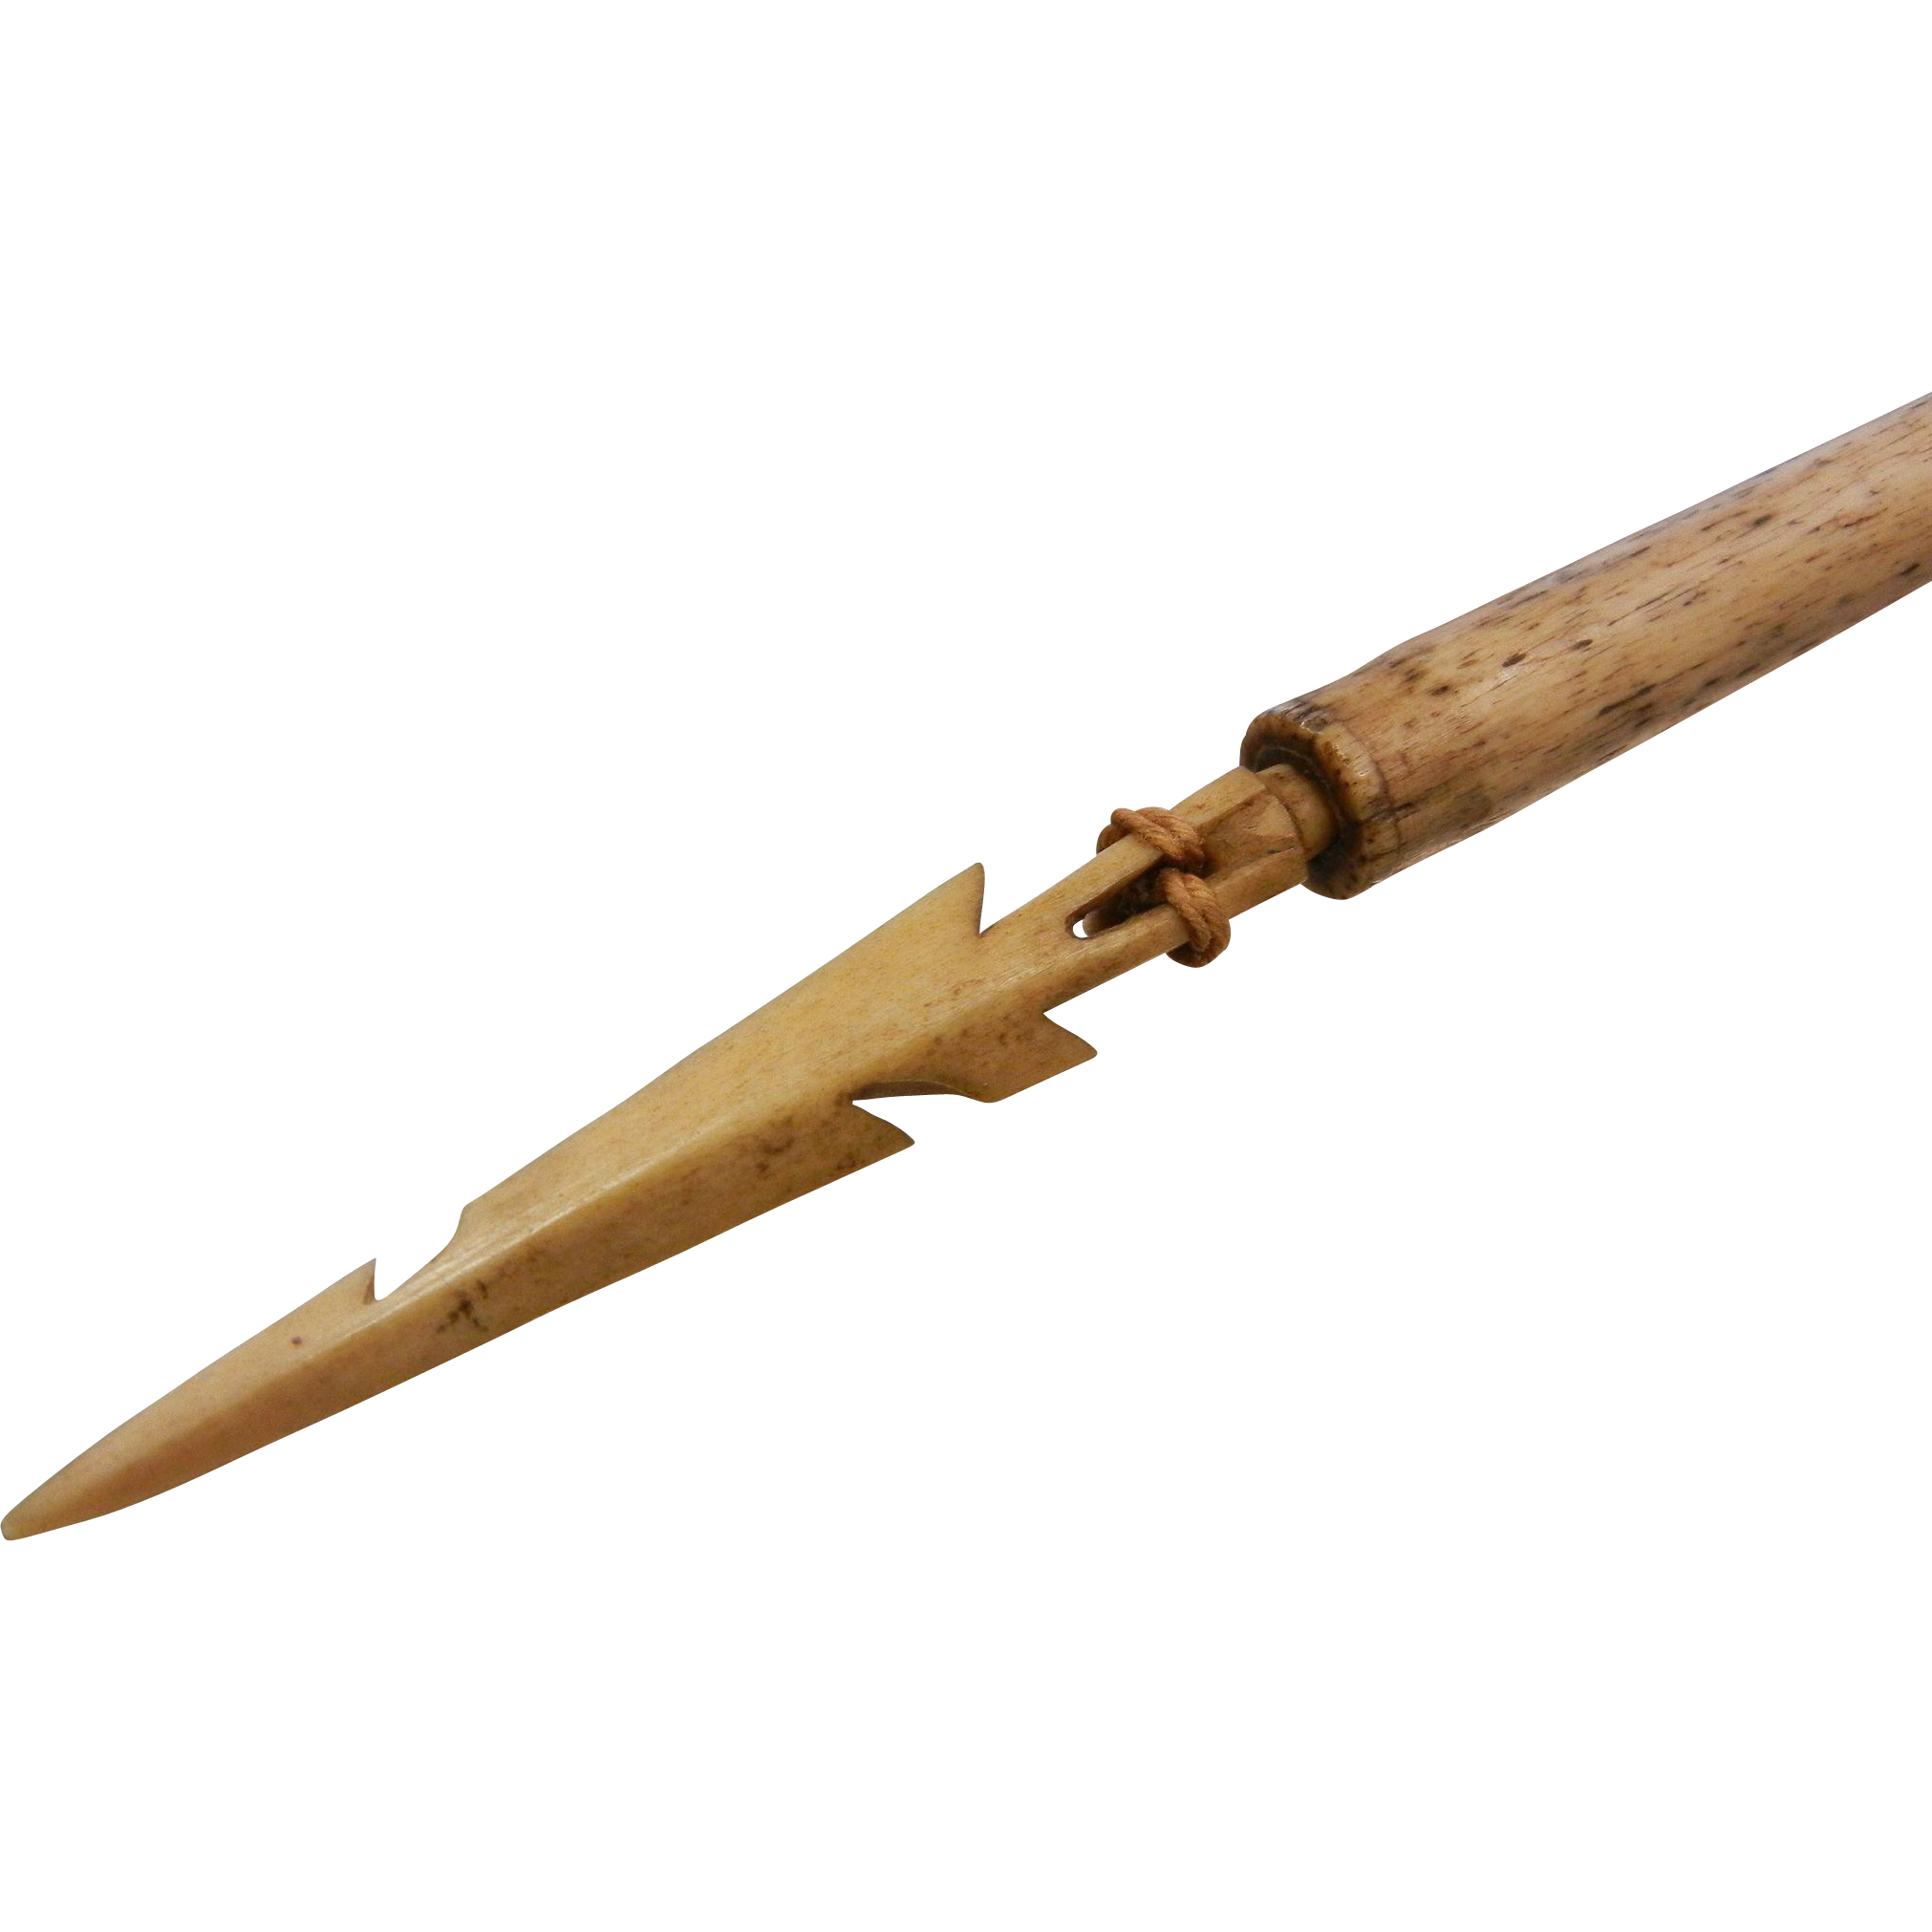 Spear PNG images 